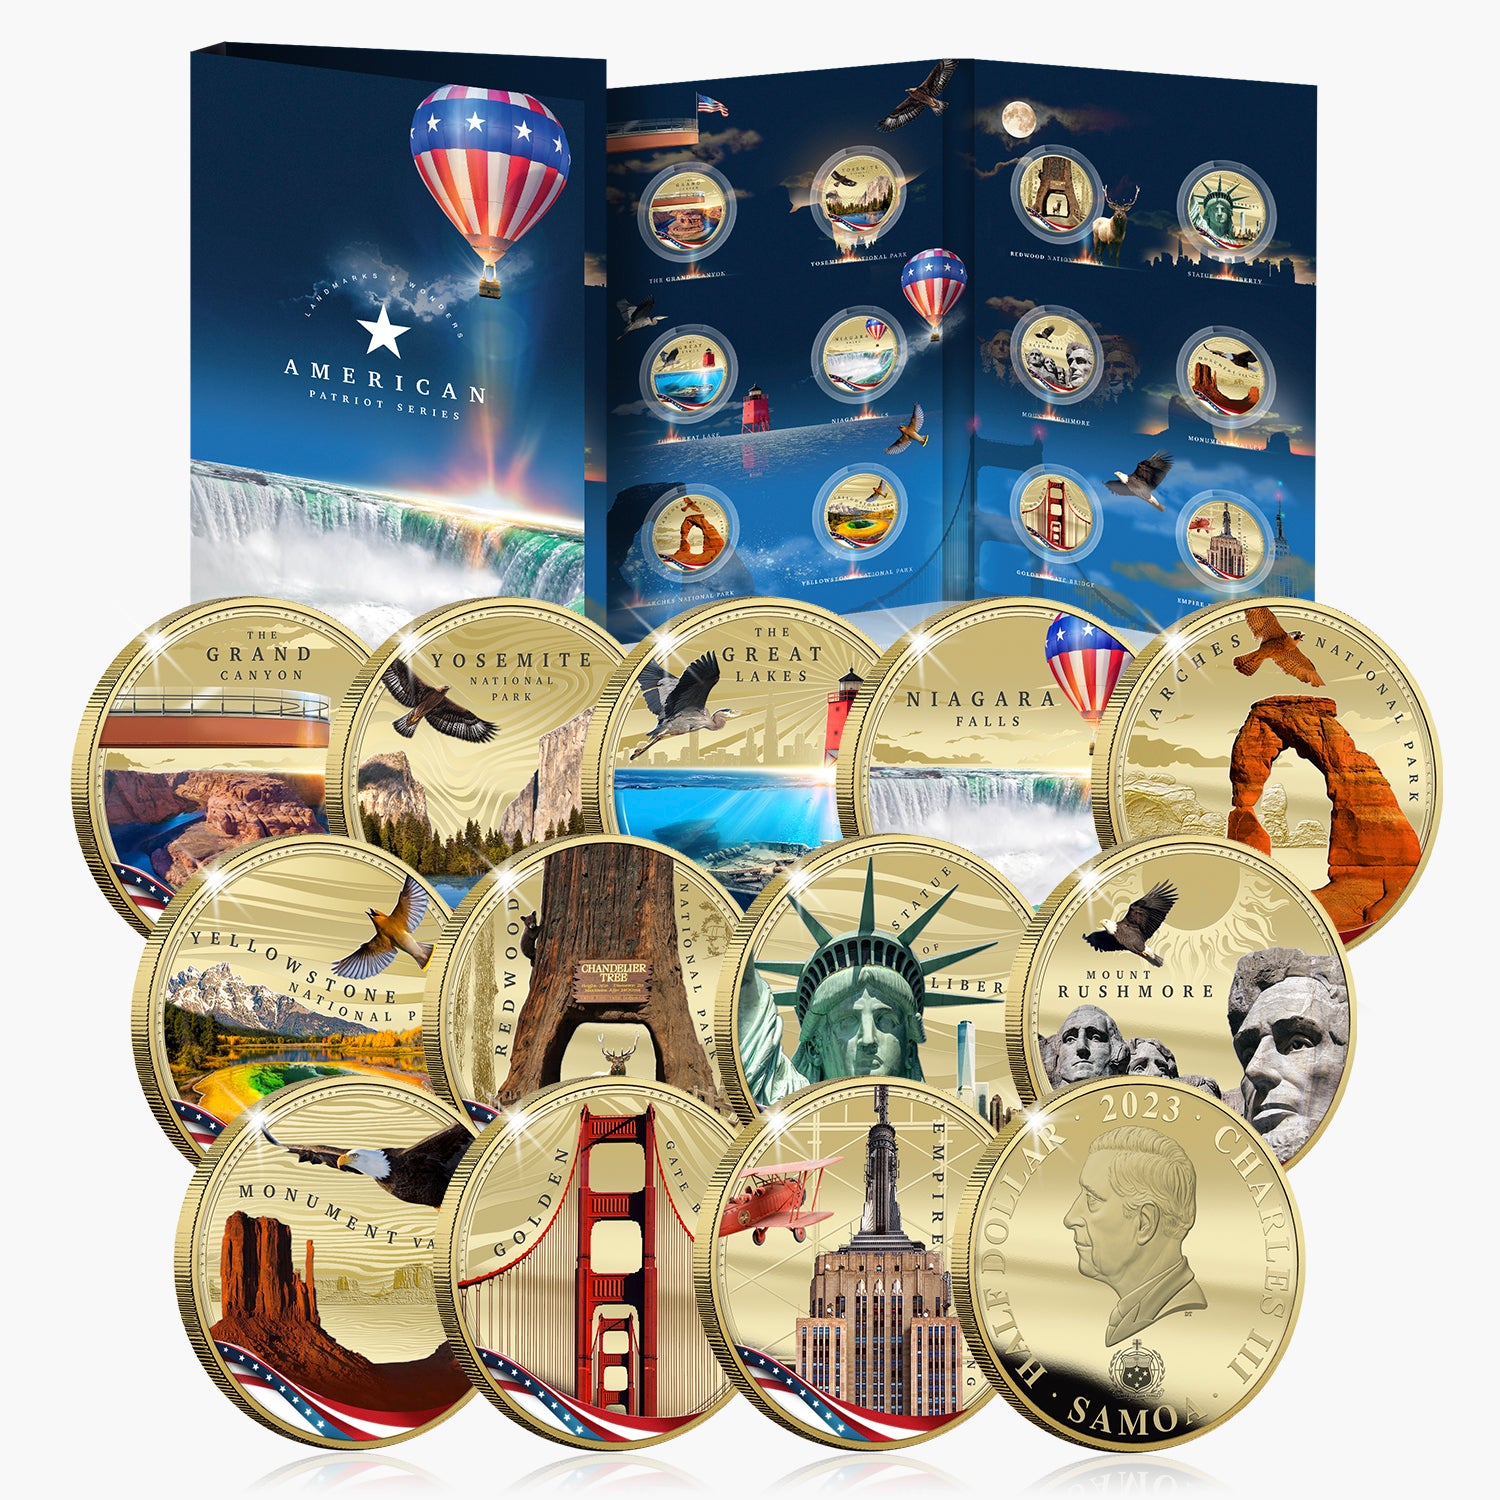 American Patriot Series -  Landmarks and Wonders Collection